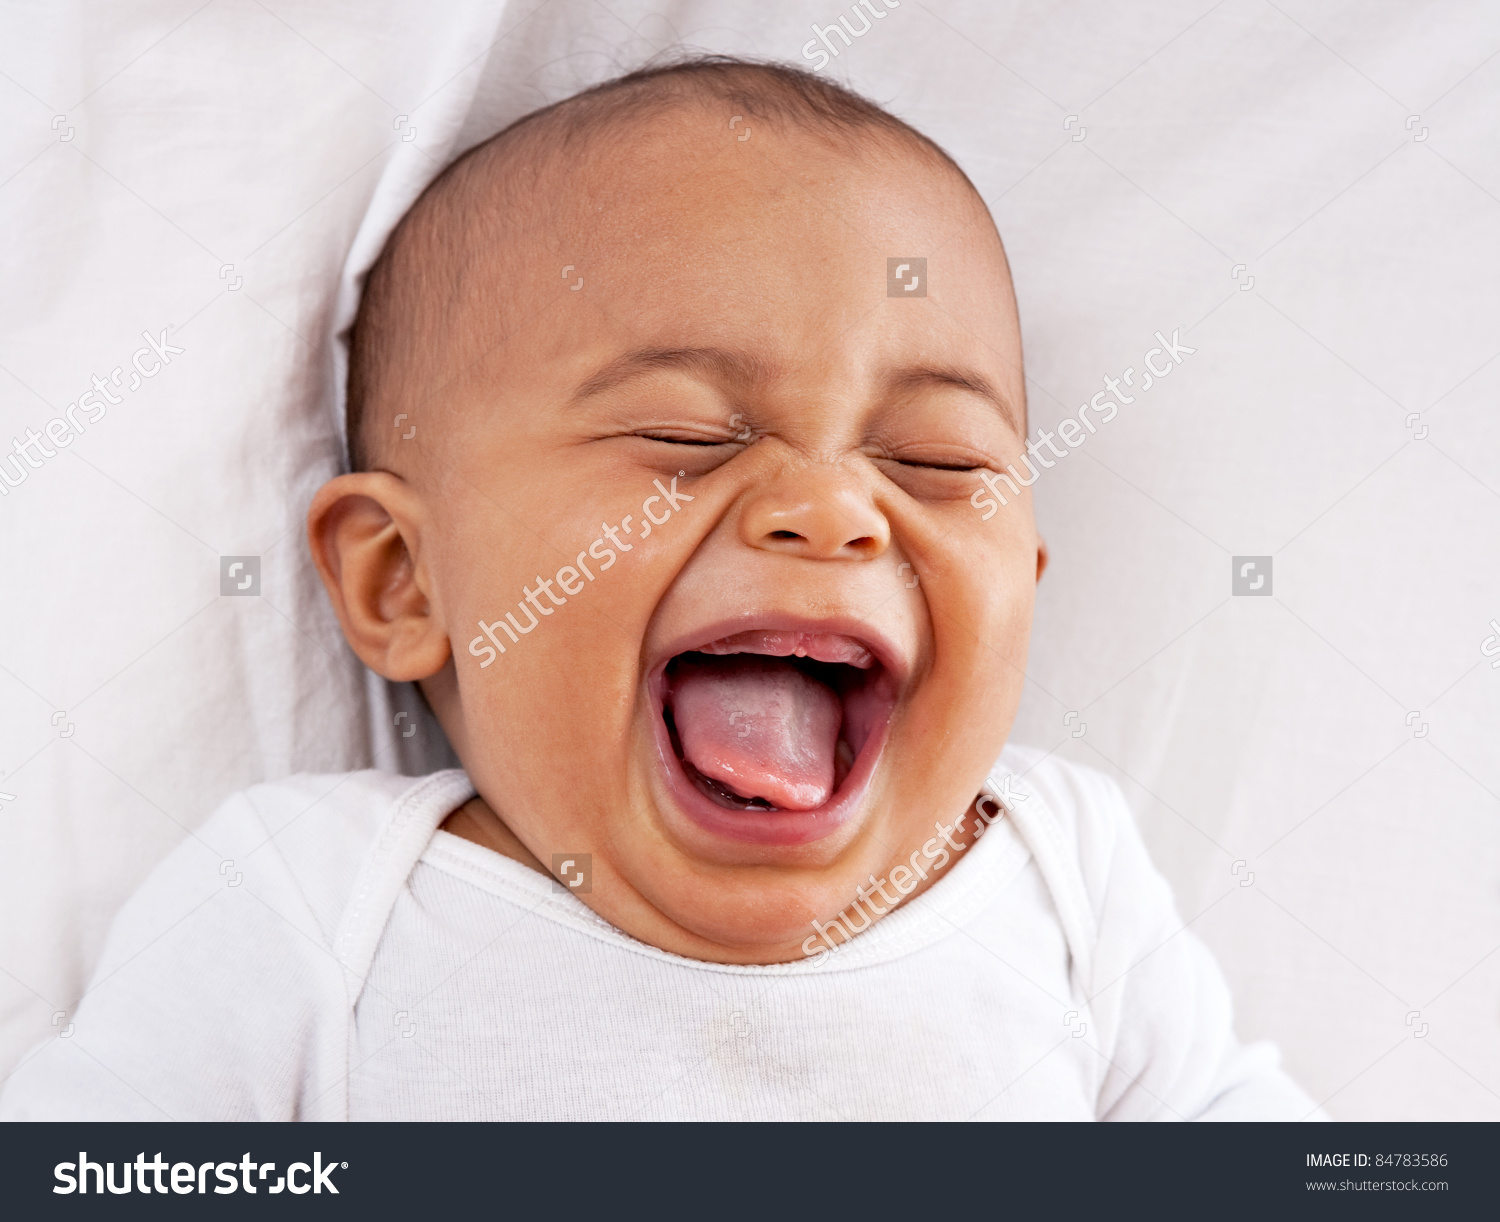 stock-photo-happy-big-laughing-month-old-african-american-baby-boy-84783586.jpg